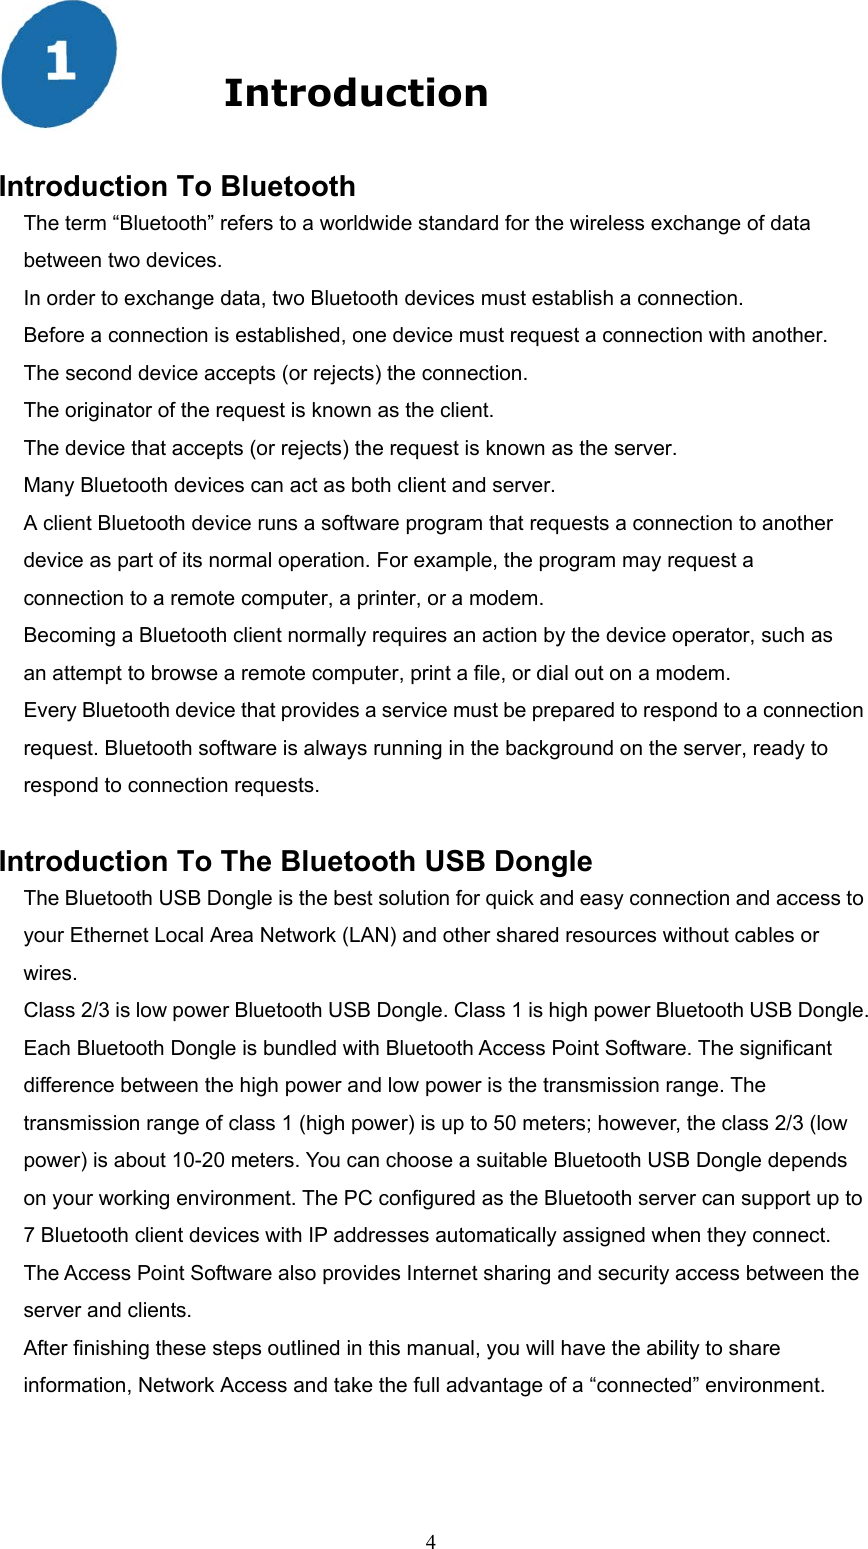  4  Introduction  Introduction To Bluetooth The term “Bluetooth” refers to a worldwide standard for the wireless exchange of data between two devices. In order to exchange data, two Bluetooth devices must establish a connection. Before a connection is established, one device must request a connection with another. The second device accepts (or rejects) the connection. The originator of the request is known as the client. The device that accepts (or rejects) the request is known as the server. Many Bluetooth devices can act as both client and server. A client Bluetooth device runs a software program that requests a connection to another device as part of its normal operation. For example, the program may request a connection to a remote computer, a printer, or a modem. Becoming a Bluetooth client normally requires an action by the device operator, such as an attempt to browse a remote computer, print a file, or dial out on a modem. Every Bluetooth device that provides a service must be prepared to respond to a connection request. Bluetooth software is always running in the background on the server, ready to respond to connection requests.  Introduction To The Bluetooth USB Dongle The Bluetooth USB Dongle is the best solution for quick and easy connection and access to your Ethernet Local Area Network (LAN) and other shared resources without cables or wires.  Class 2/3 is low power Bluetooth USB Dongle. Class 1 is high power Bluetooth USB Dongle. Each Bluetooth Dongle is bundled with Bluetooth Access Point Software. The significant difference between the high power and low power is the transmission range. The transmission range of class 1 (high power) is up to 50 meters; however, the class 2/3 (low power) is about 10-20 meters. You can choose a suitable Bluetooth USB Dongle depends on your working environment. The PC configured as the Bluetooth server can support up to 7 Bluetooth client devices with IP addresses automatically assigned when they connect. The Access Point Software also provides Internet sharing and security access between the server and clients.   After finishing these steps outlined in this manual, you will have the ability to share information, Network Access and take the full advantage of a “connected” environment. 